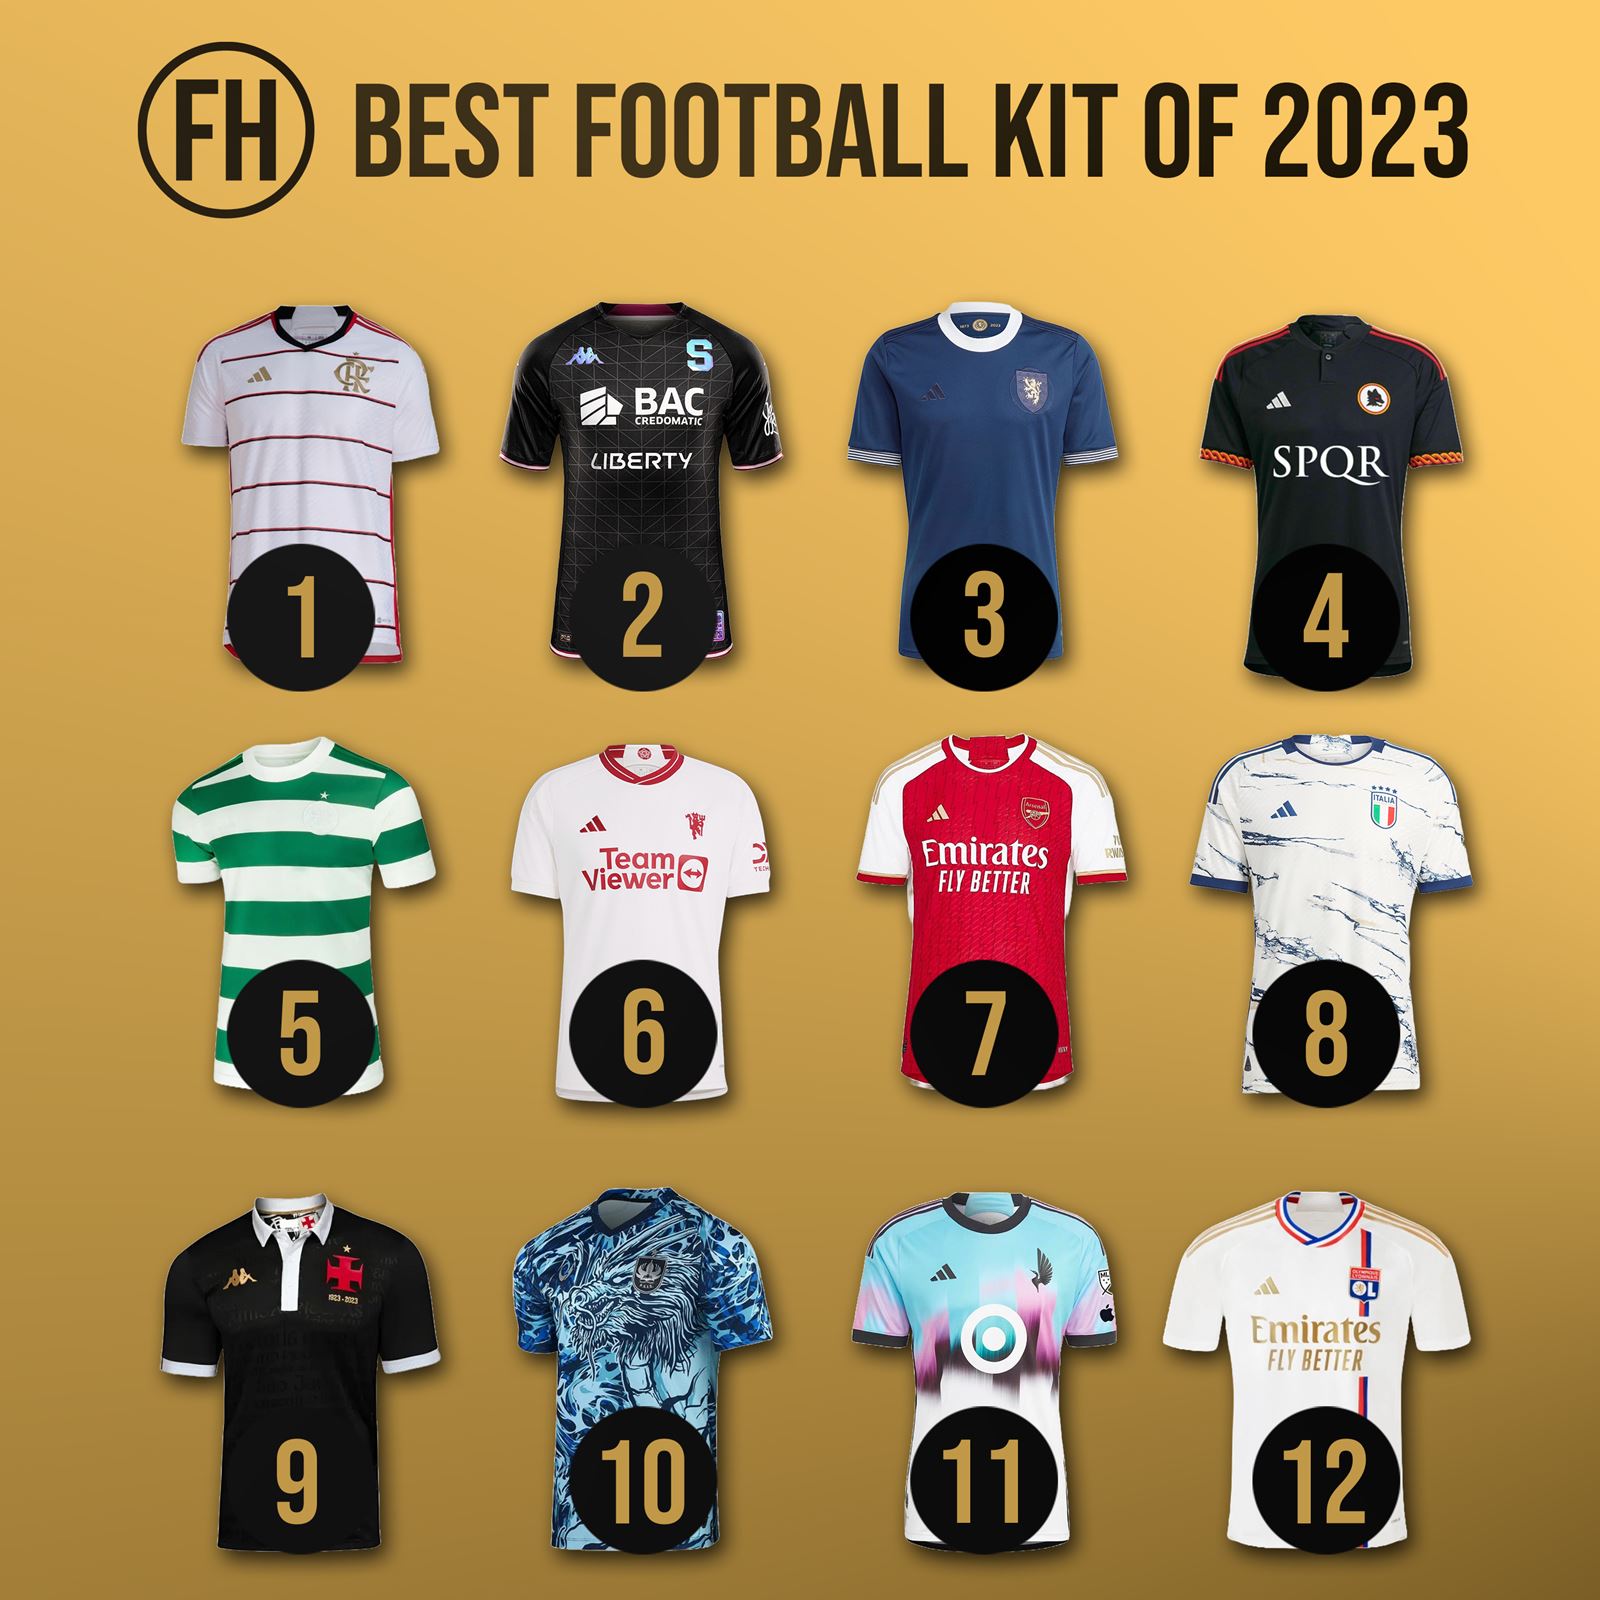 10 Best Football Kits of All Time (Home, Away & Third Kits)